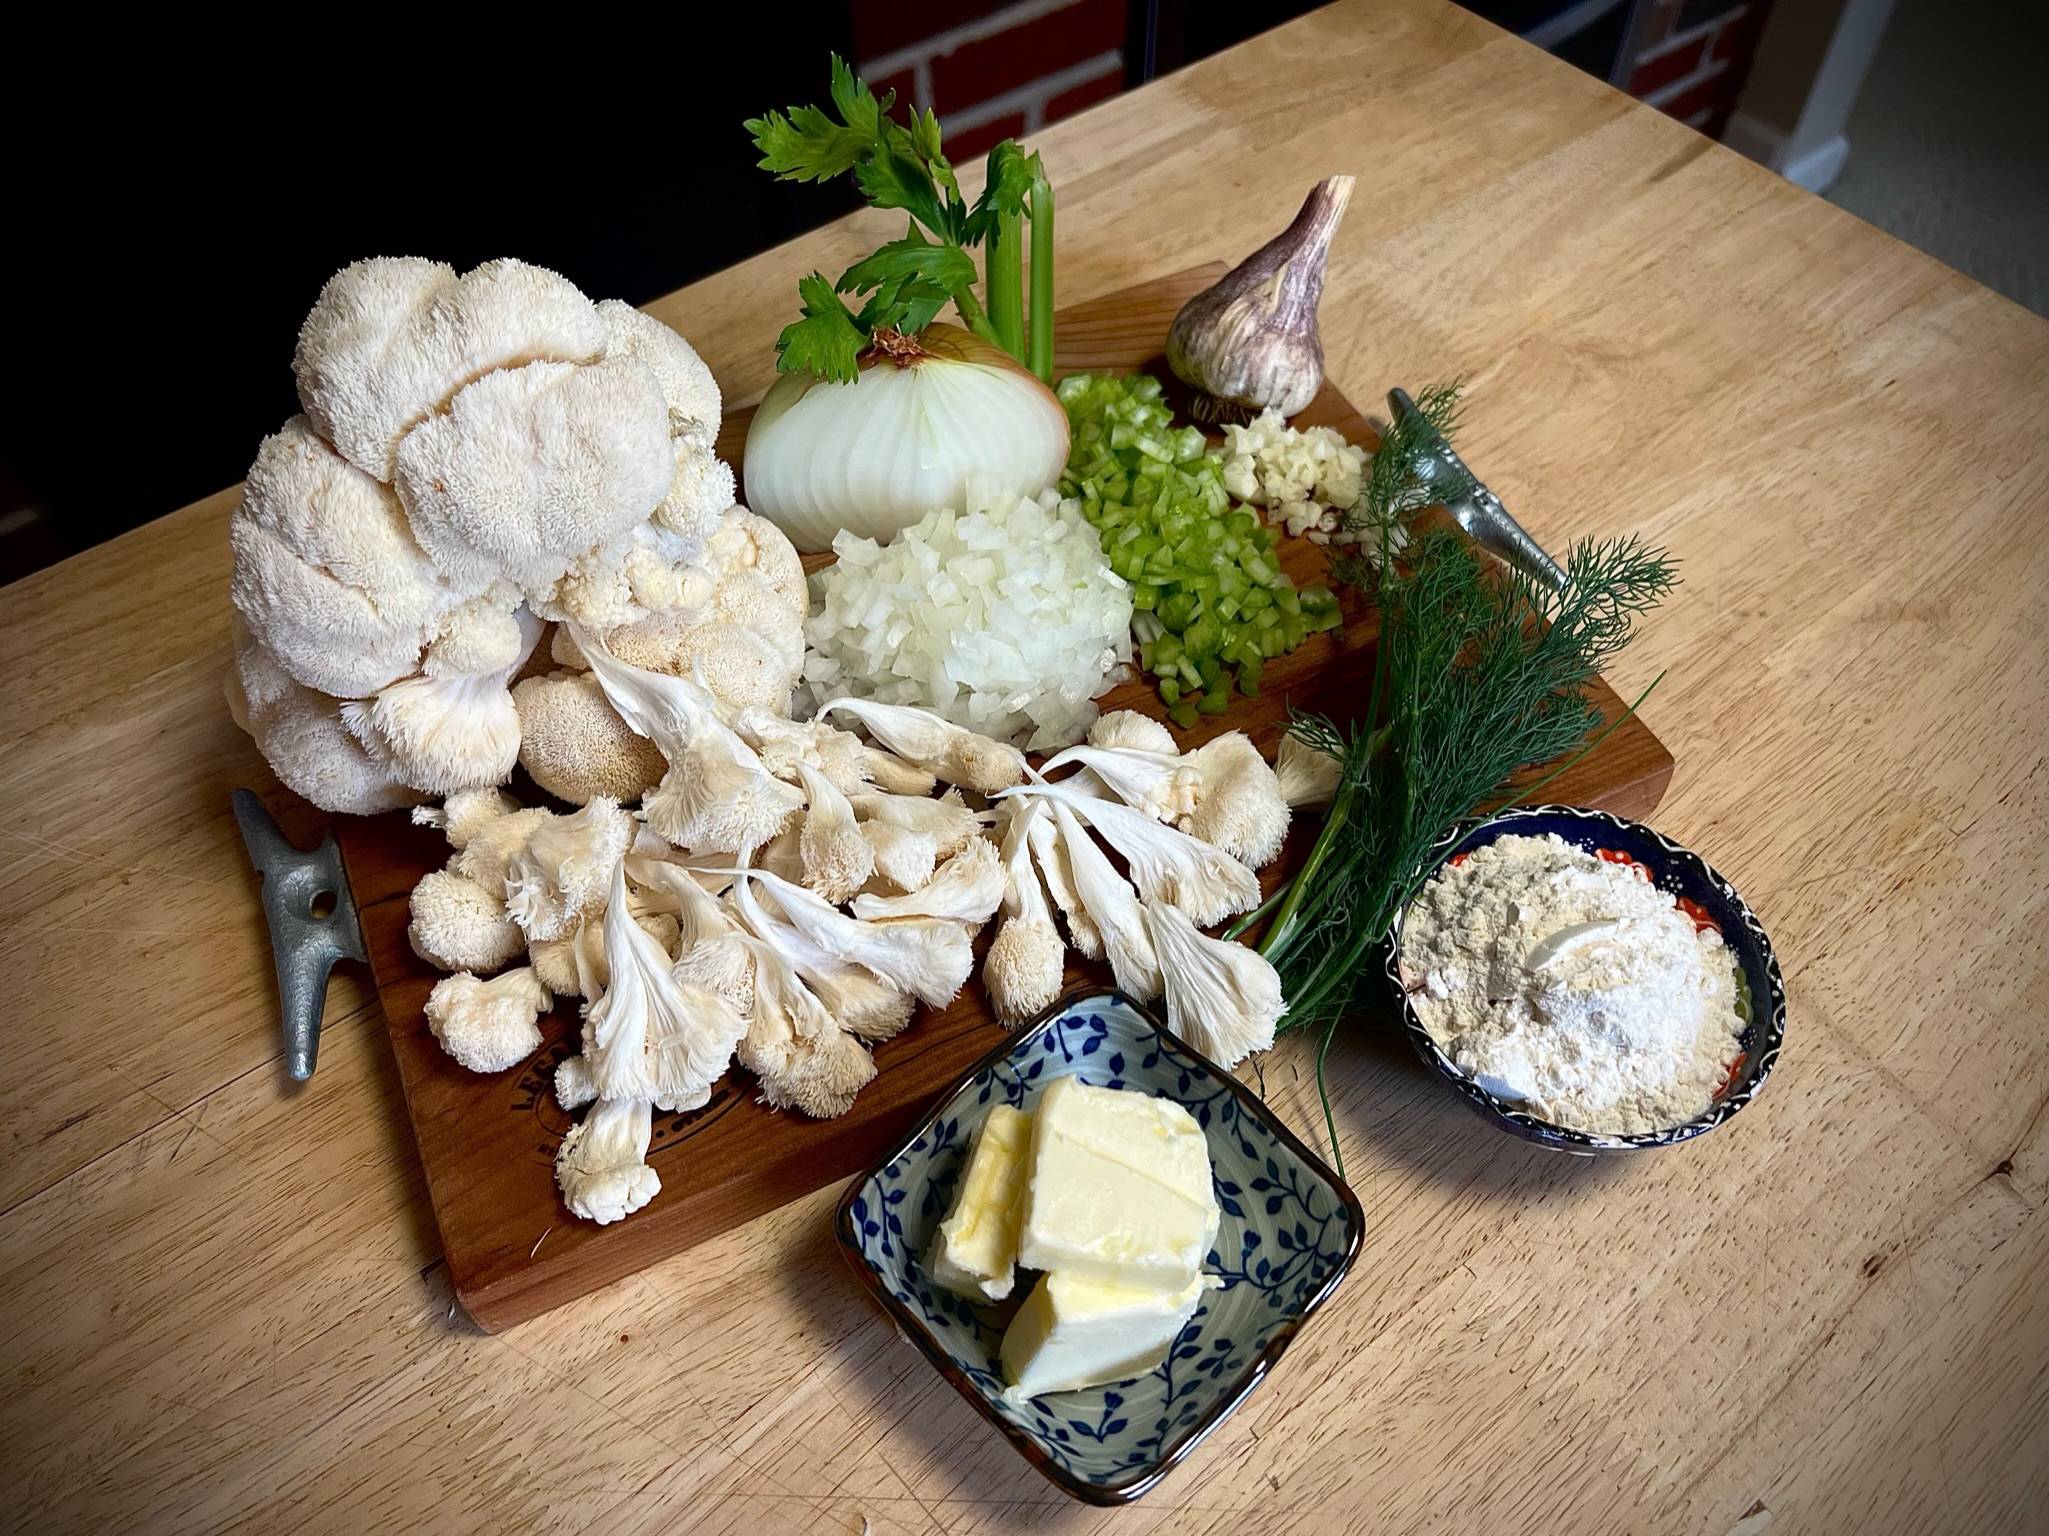 Lion's mane with other ingredients